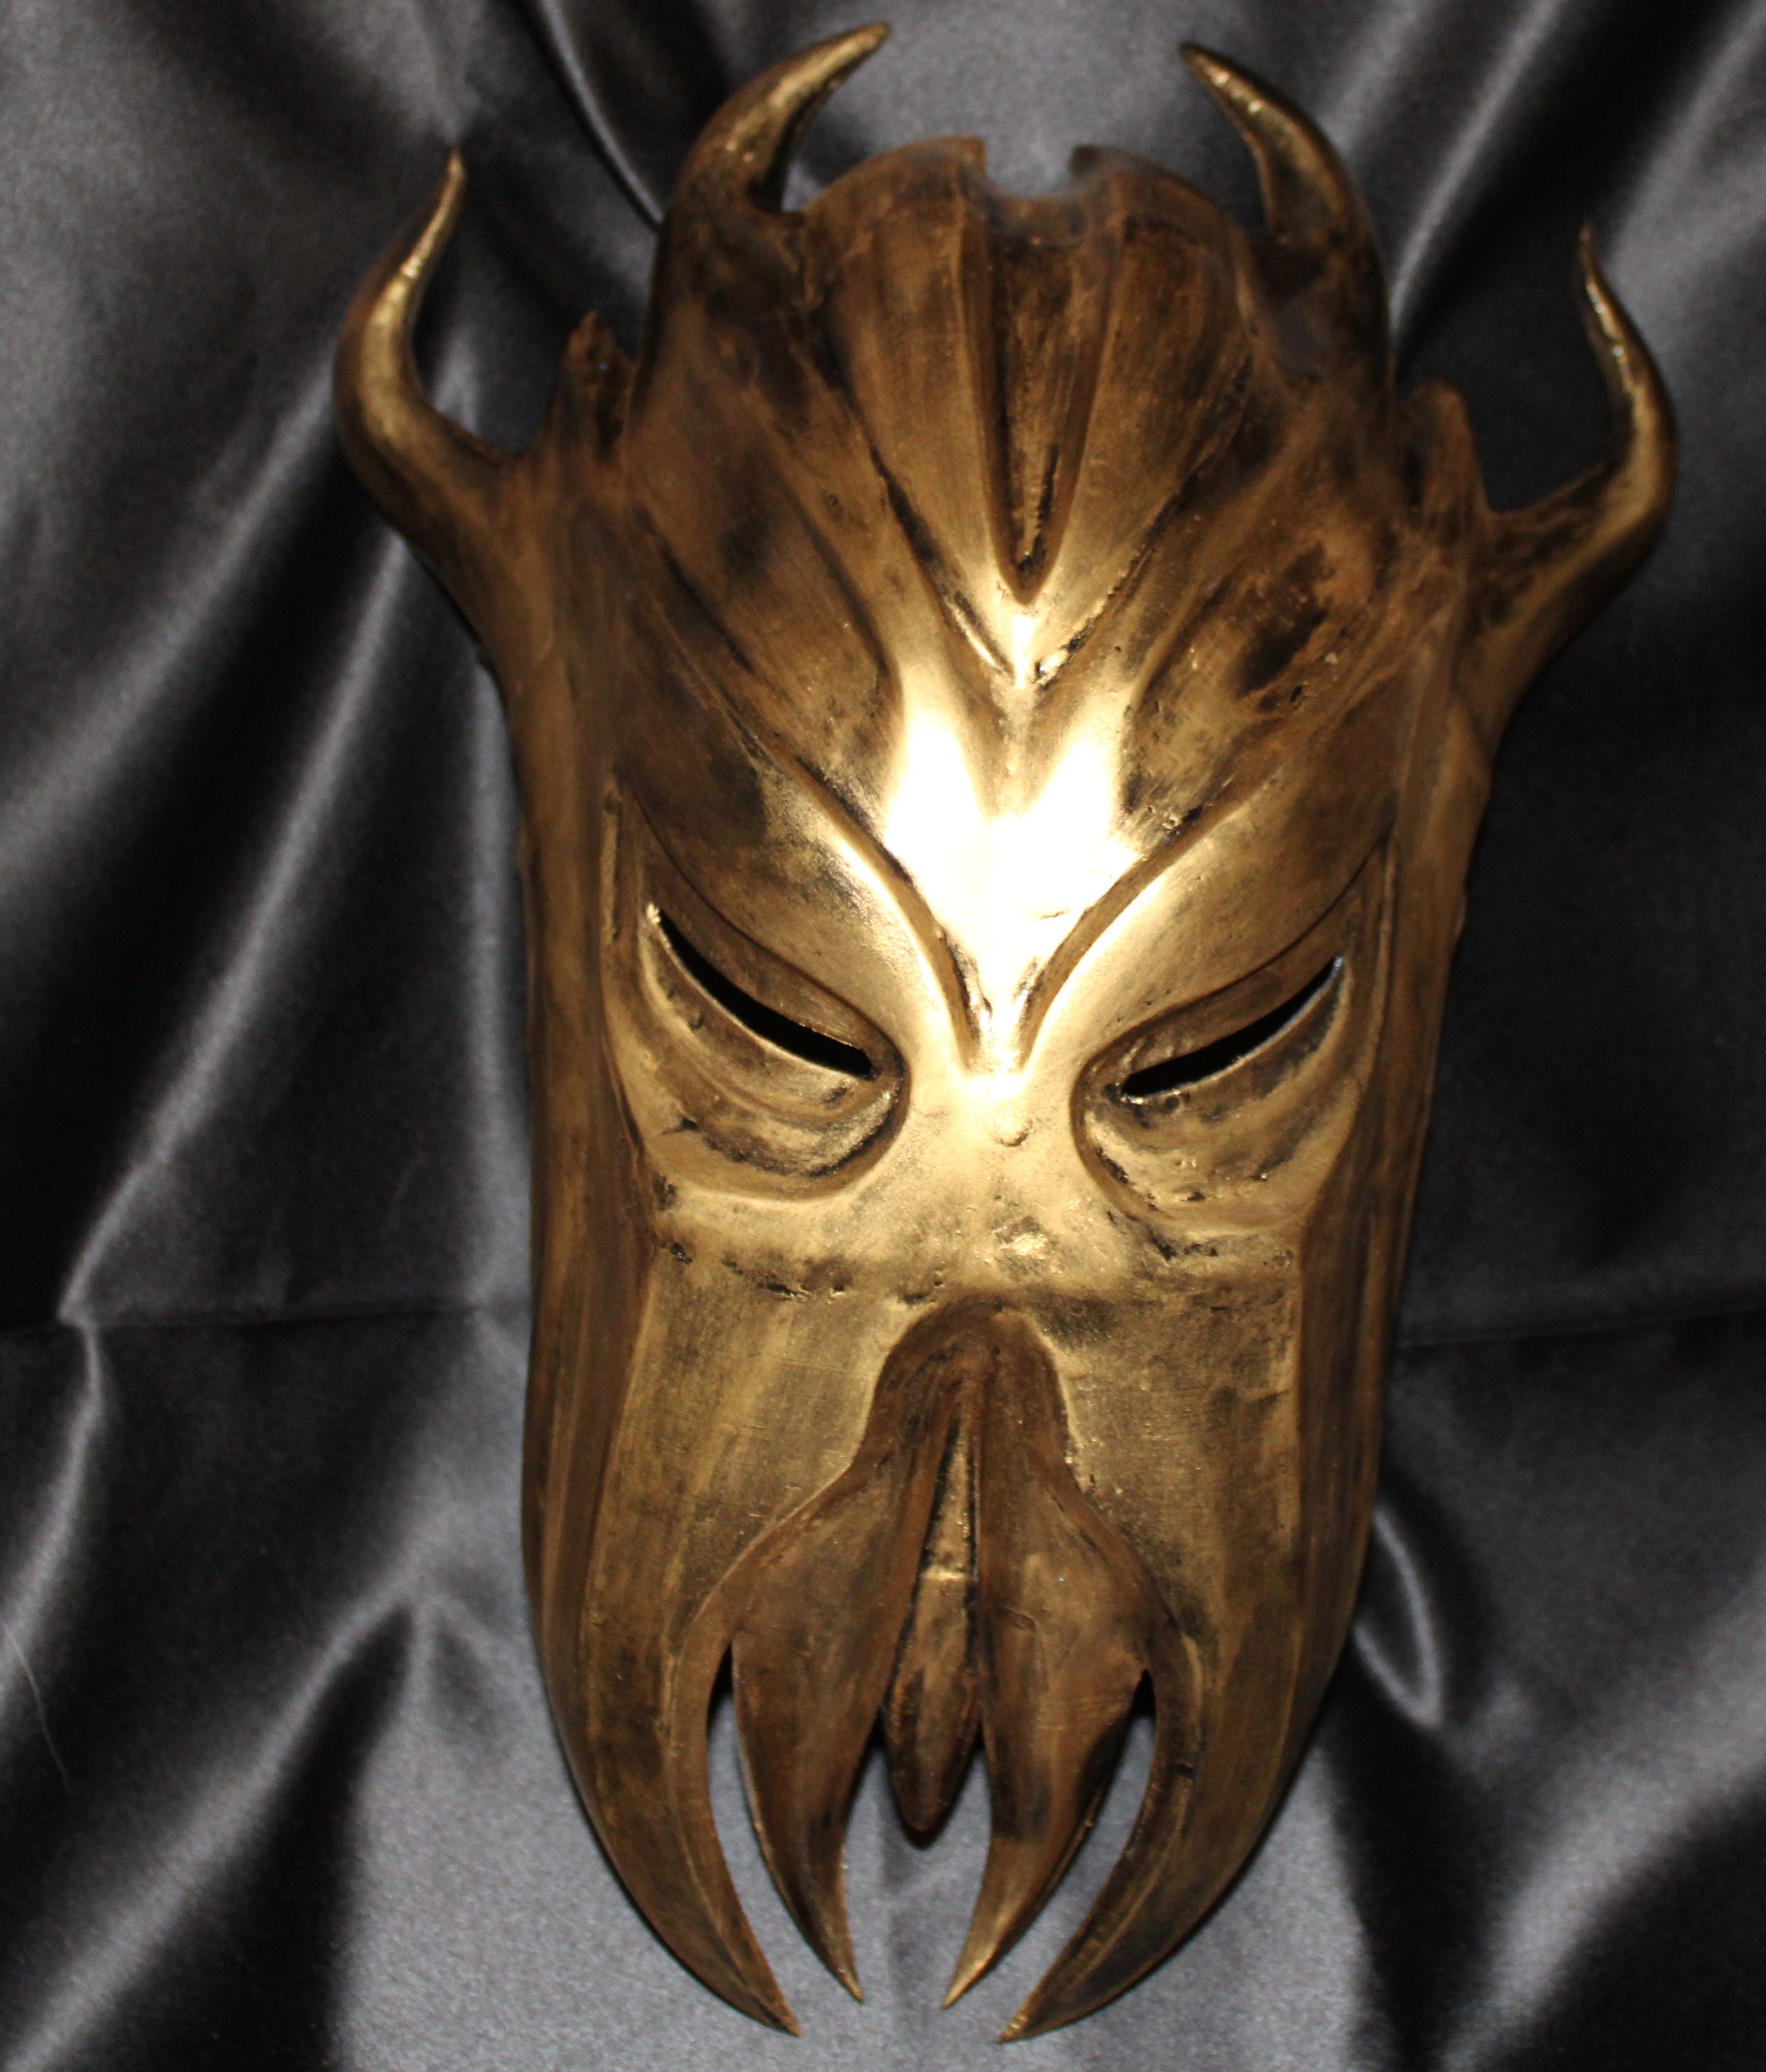 Mask Inspired by Etsy